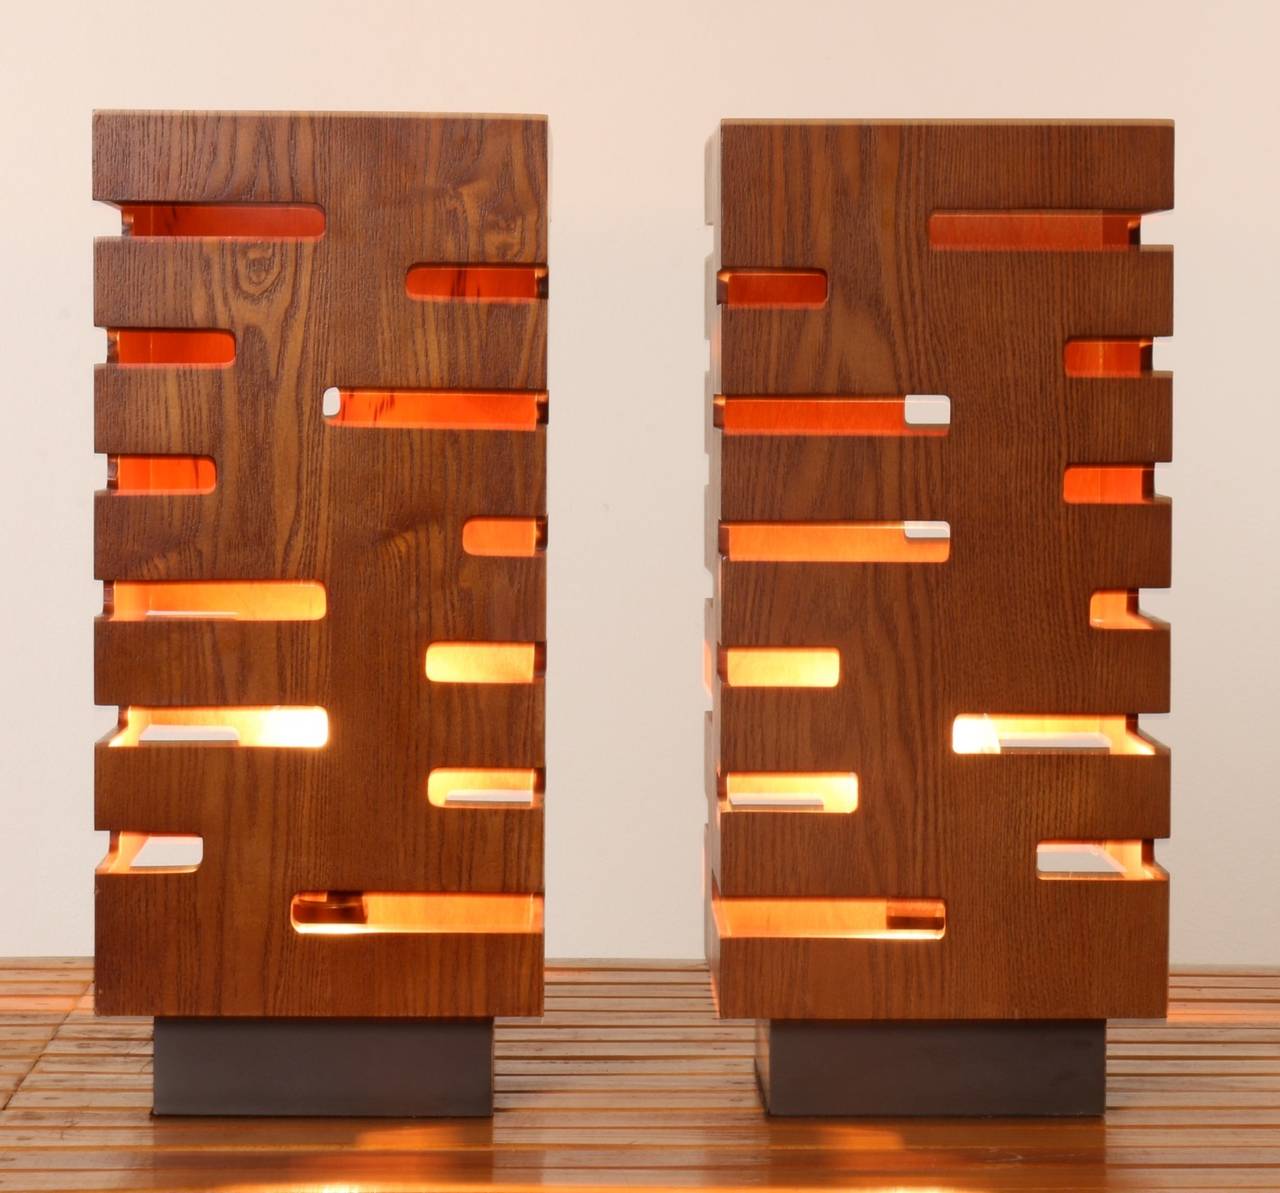 These 1970s walnut table lamps resemble rectangular towers; staggered, geometric cutouts - like open air windows create passageways from which the light shines and the air flows. Solidly built, on their original black painted wood bases, these 19